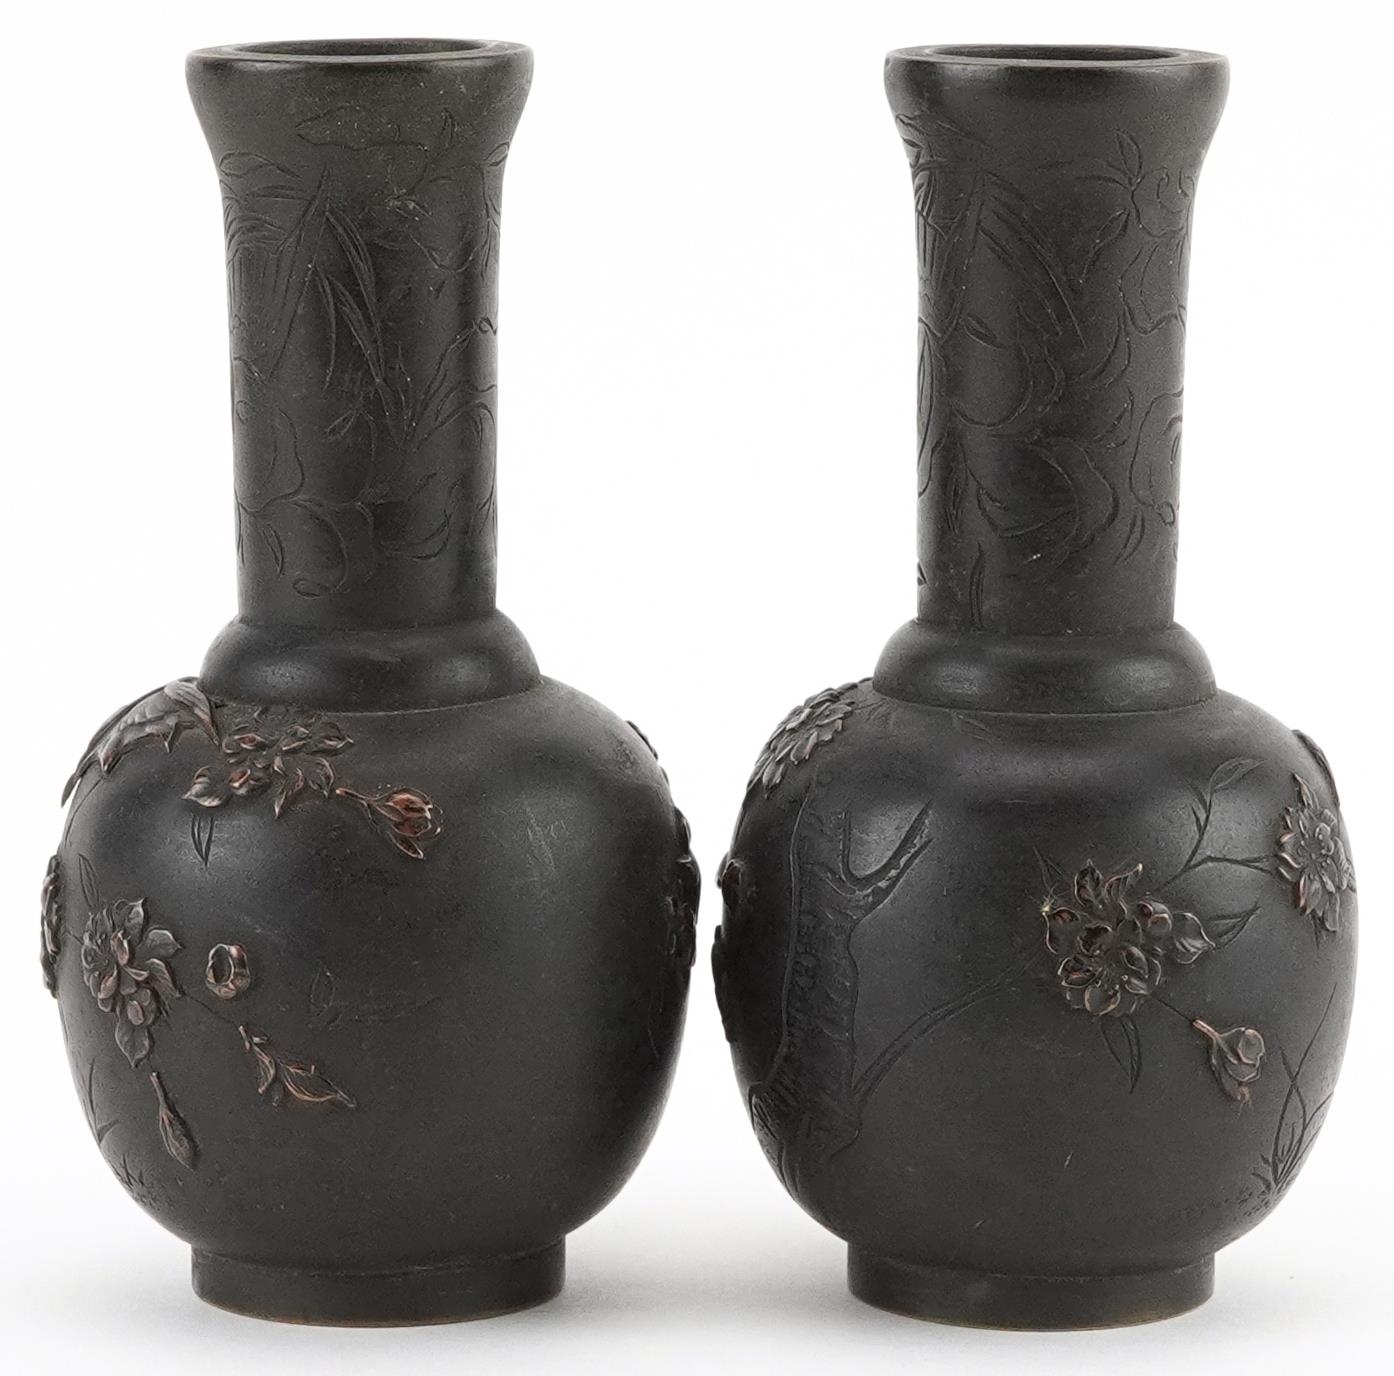 Pair of Japanese bronze vases cast in relief with birds of paradise amongst flowers, each 12cm high - Image 2 of 6